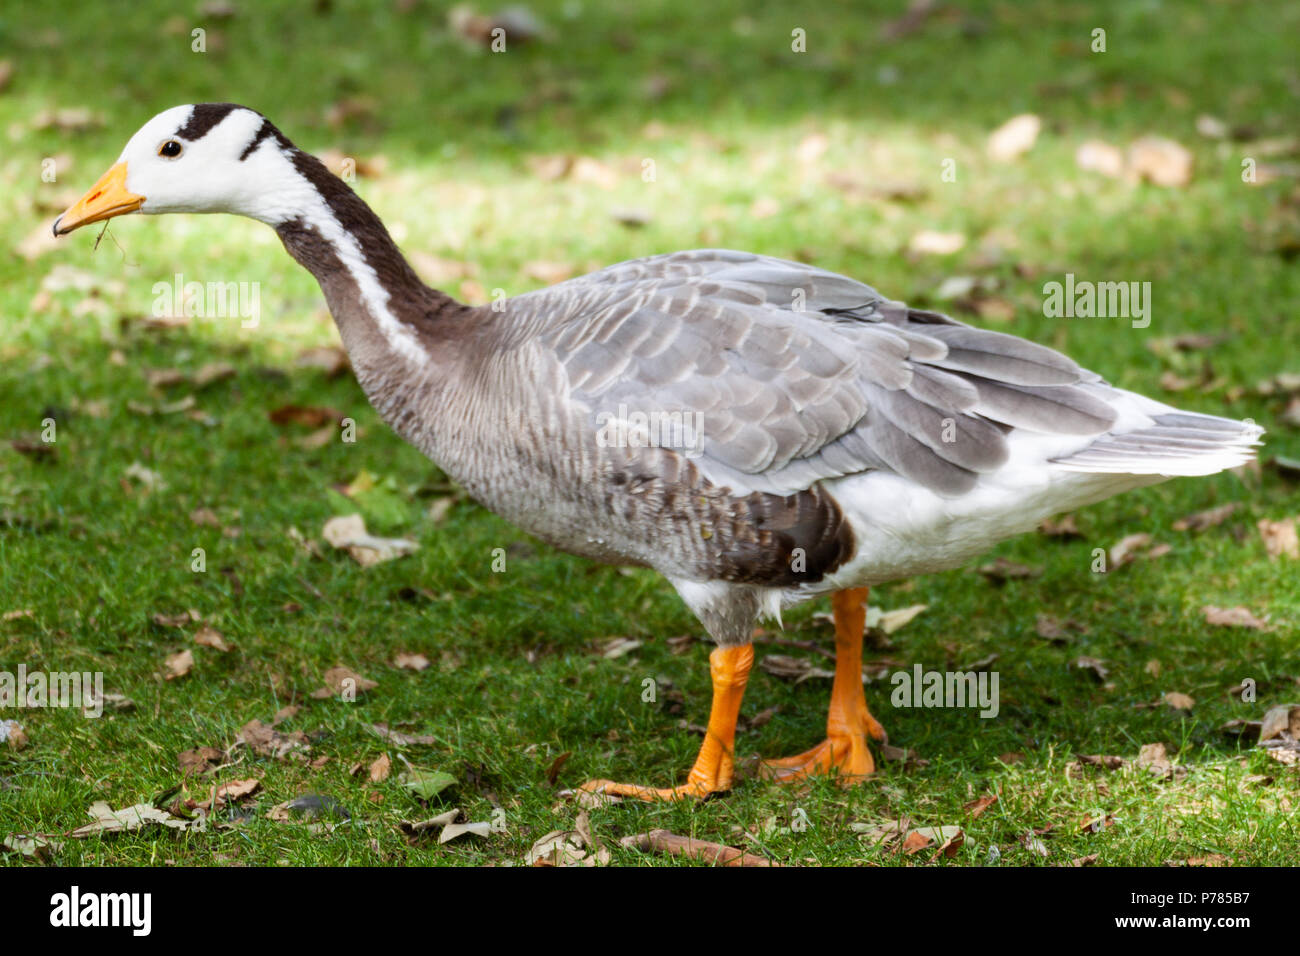 A duck walking on the grass Stock Photo